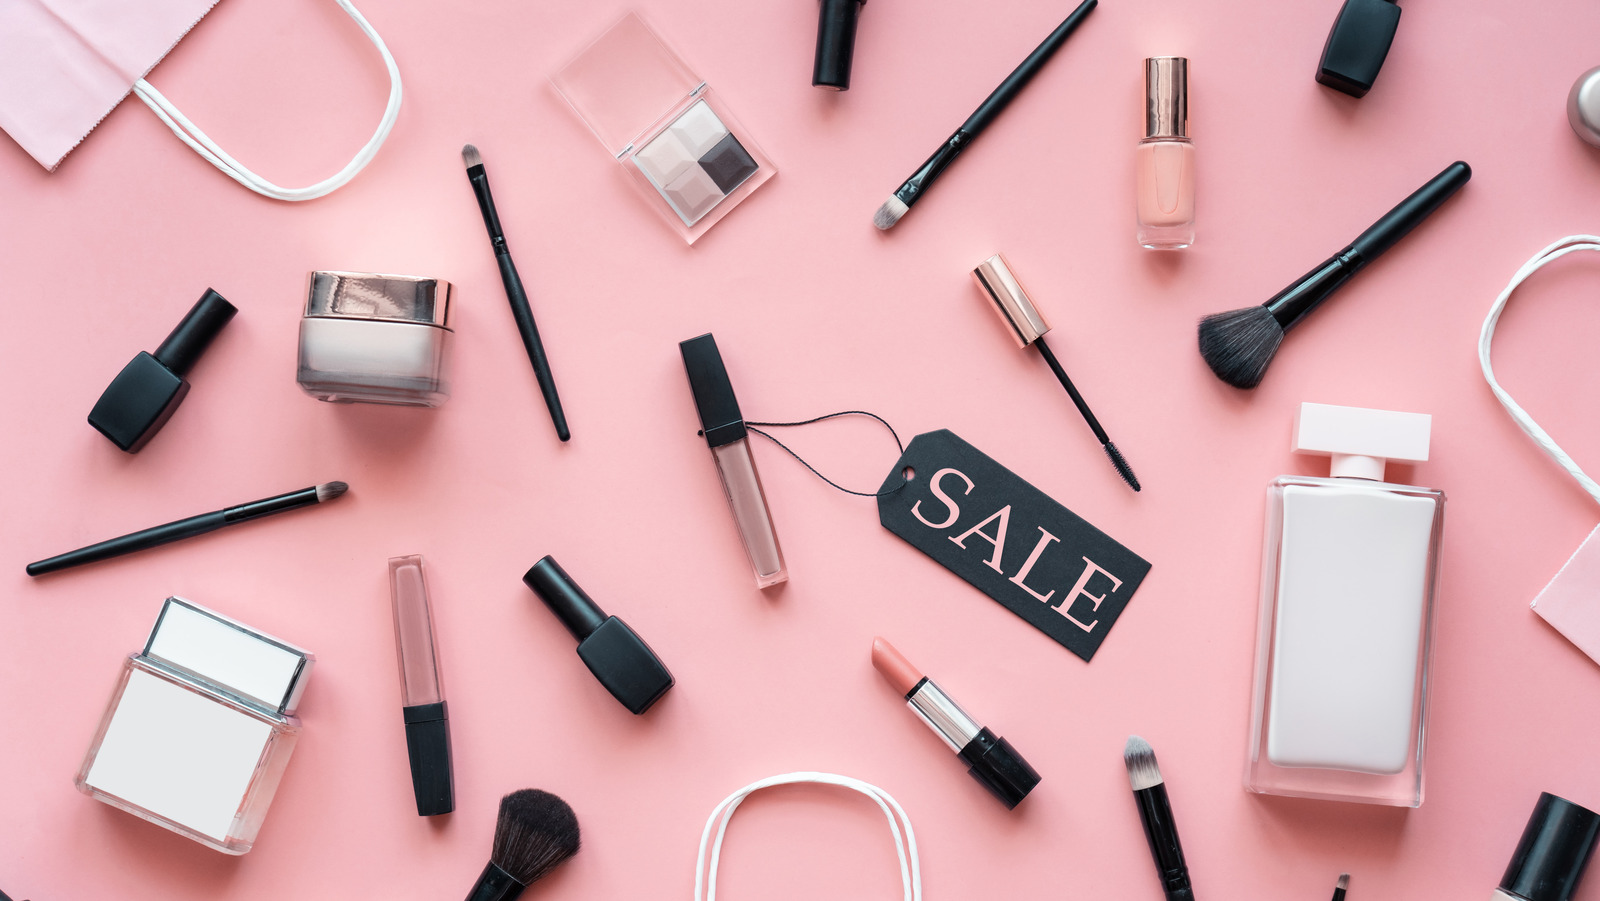 Cyber Monday Beauty Deals You Have To Grab Quickly Before They’re Gone – Glam